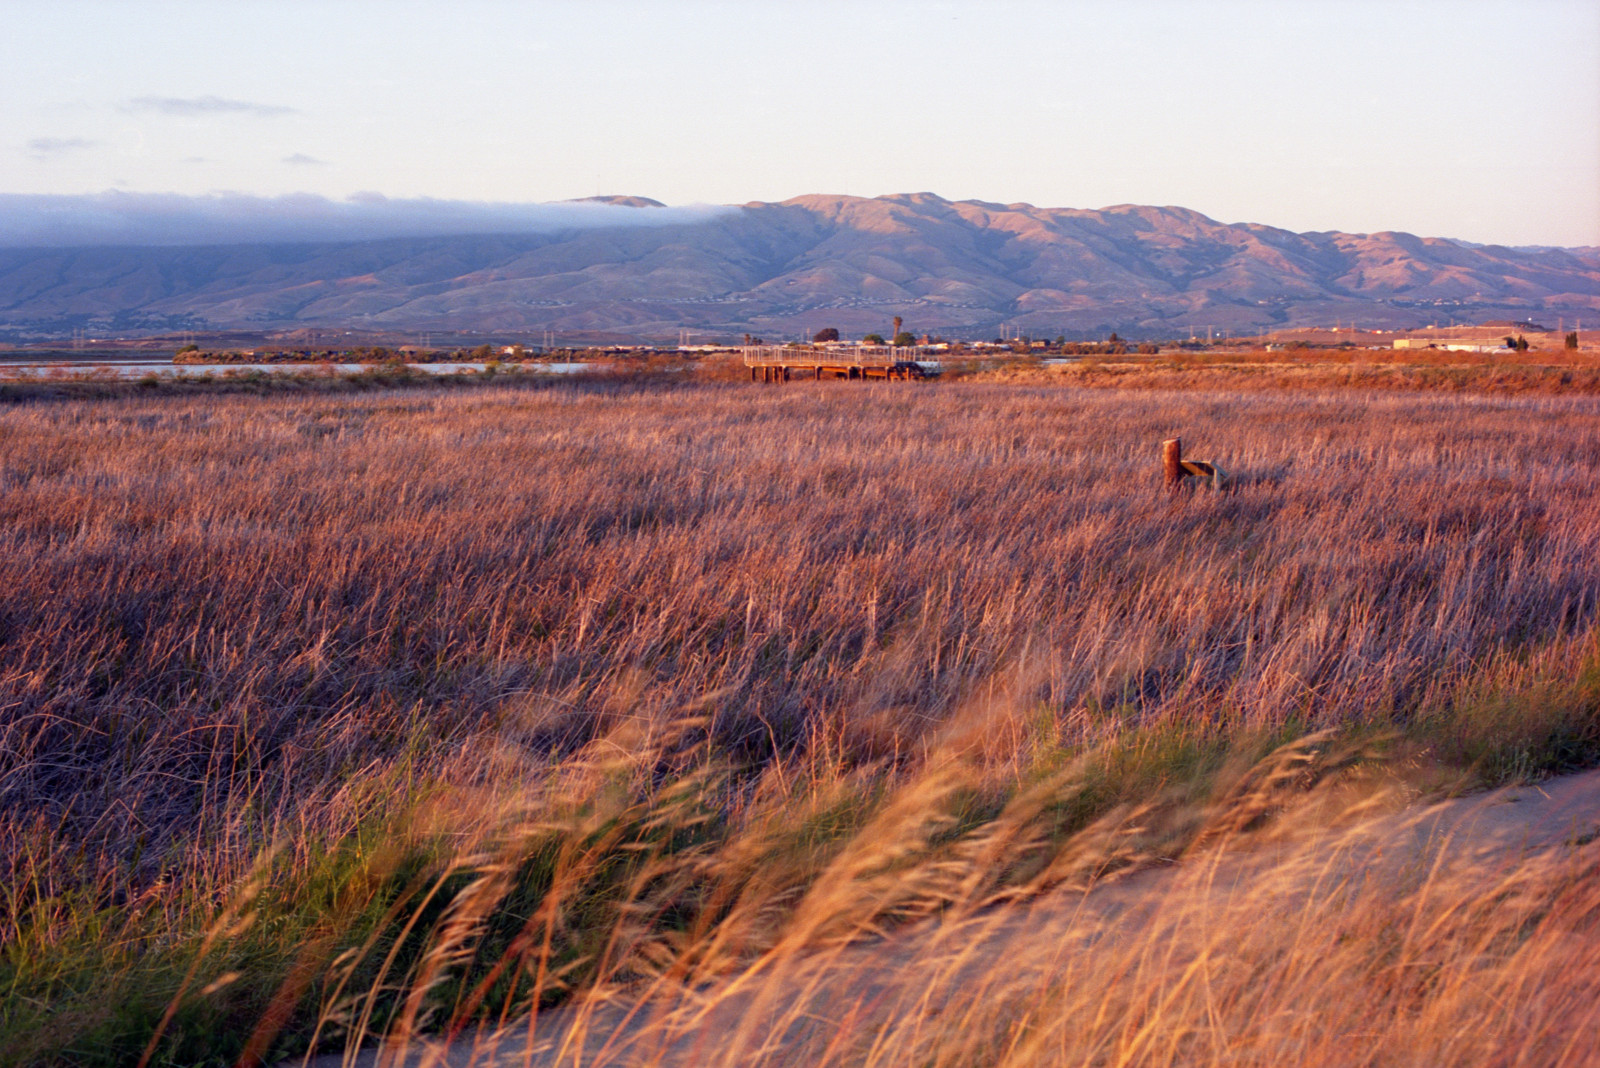 Looking across Alviso wetlands toward the East Bay mountains, a stream of fog flowing in from the left, sunlight touching the mountaintops. Closer, a row of green grasses sets the background for beige-dry grasses waving in the breeze.